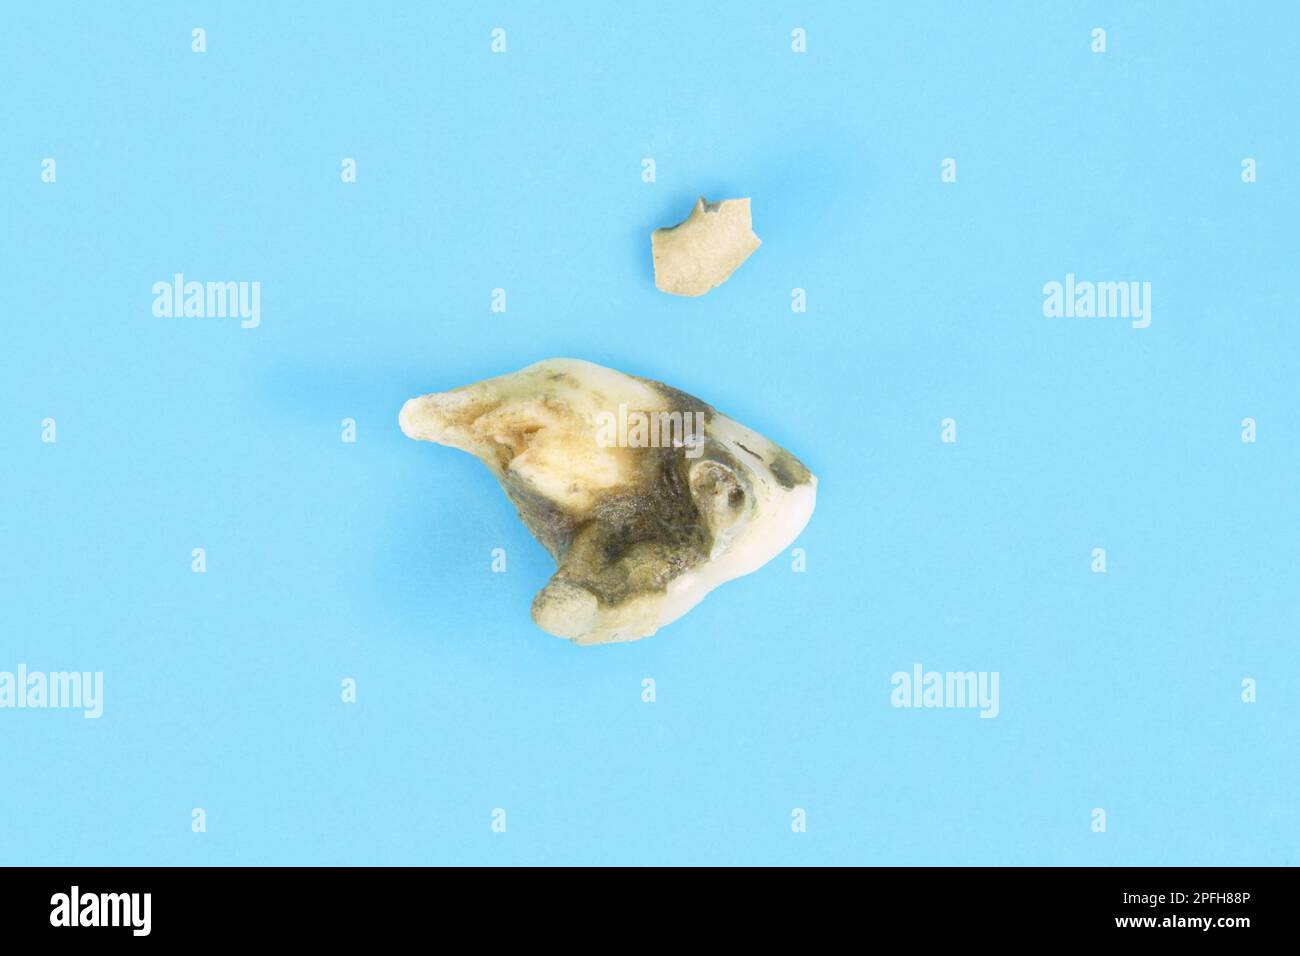 Canine molar dog tooth with dental calculus and piece of toothing stone broken off Stock Photo